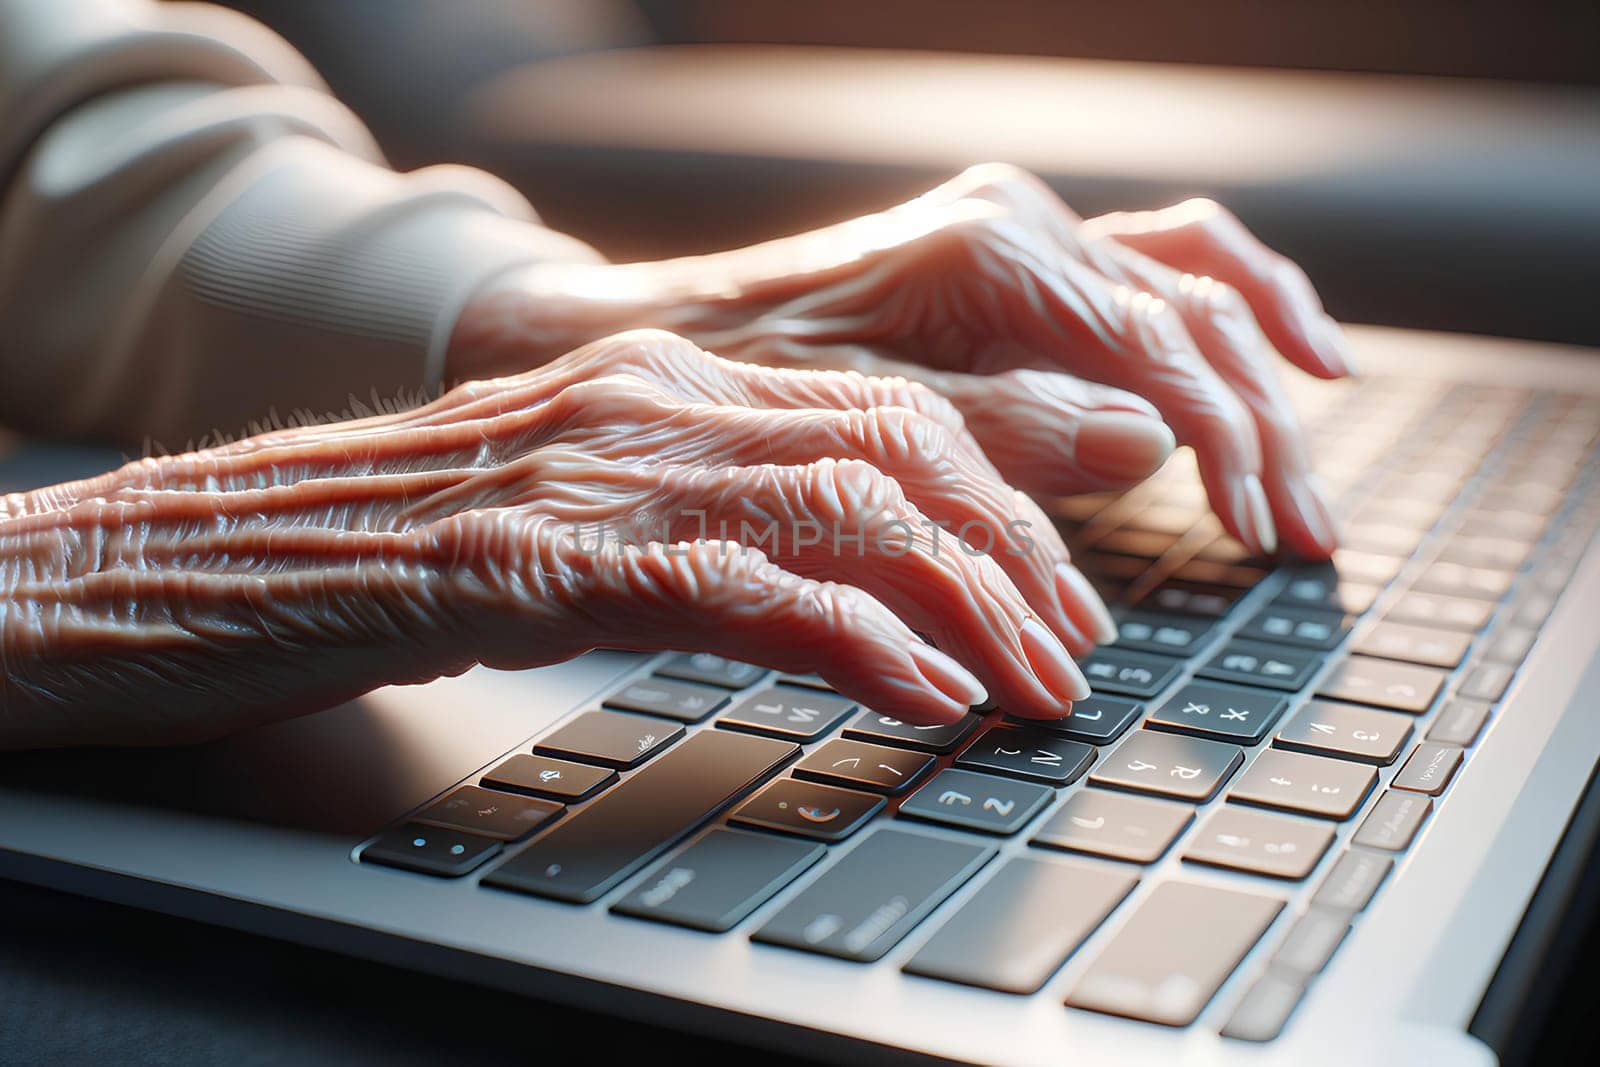 hands of an elderly woman on a computer keyboard close-up by Annado